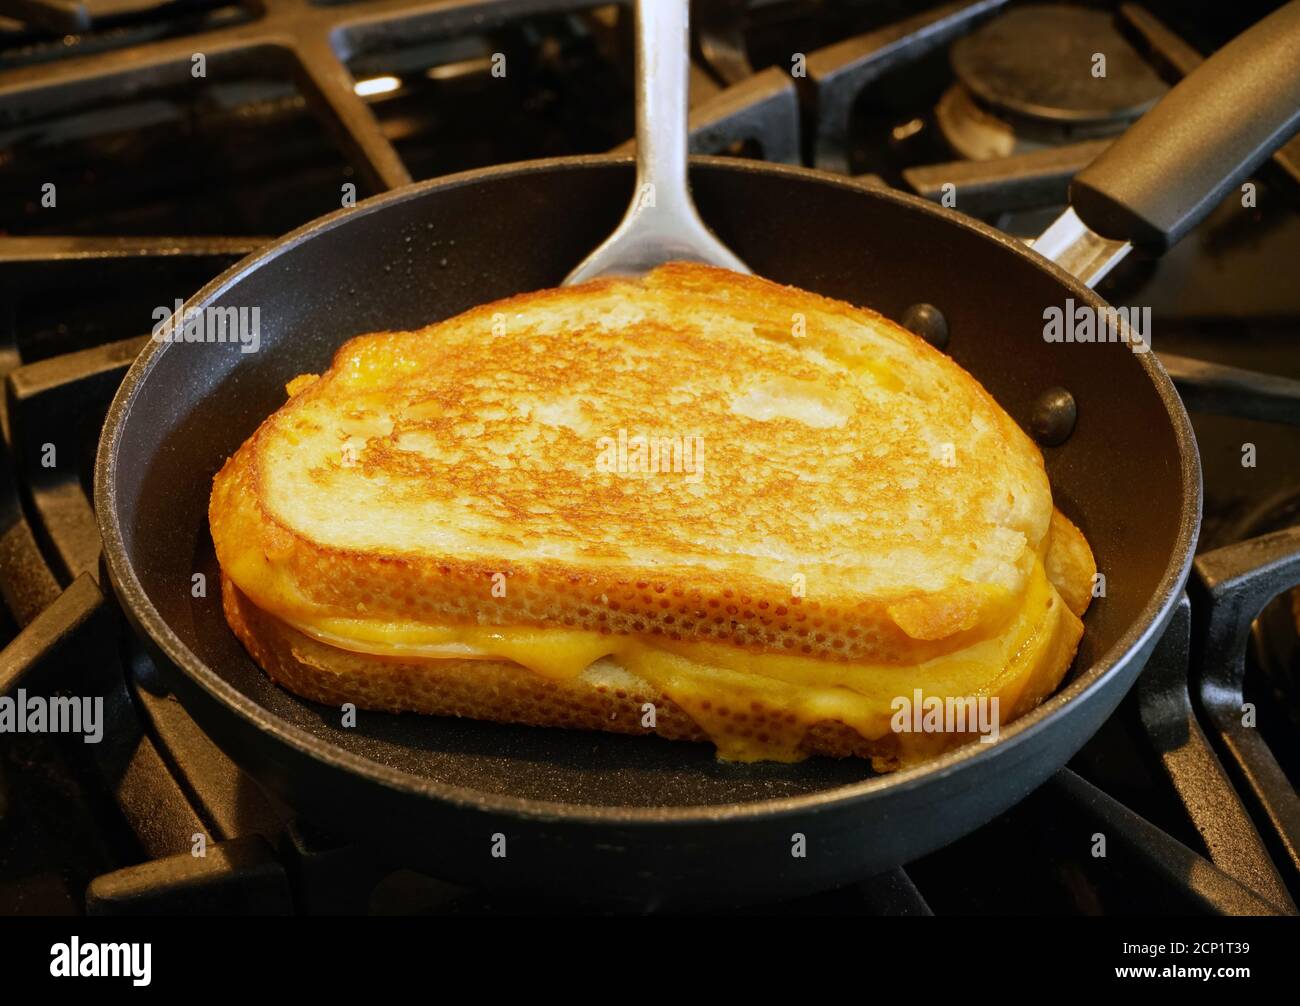 Antagonist affix Lodge Grilled cheese sandwich being grilled in frying pan Stock Photo - Alamy